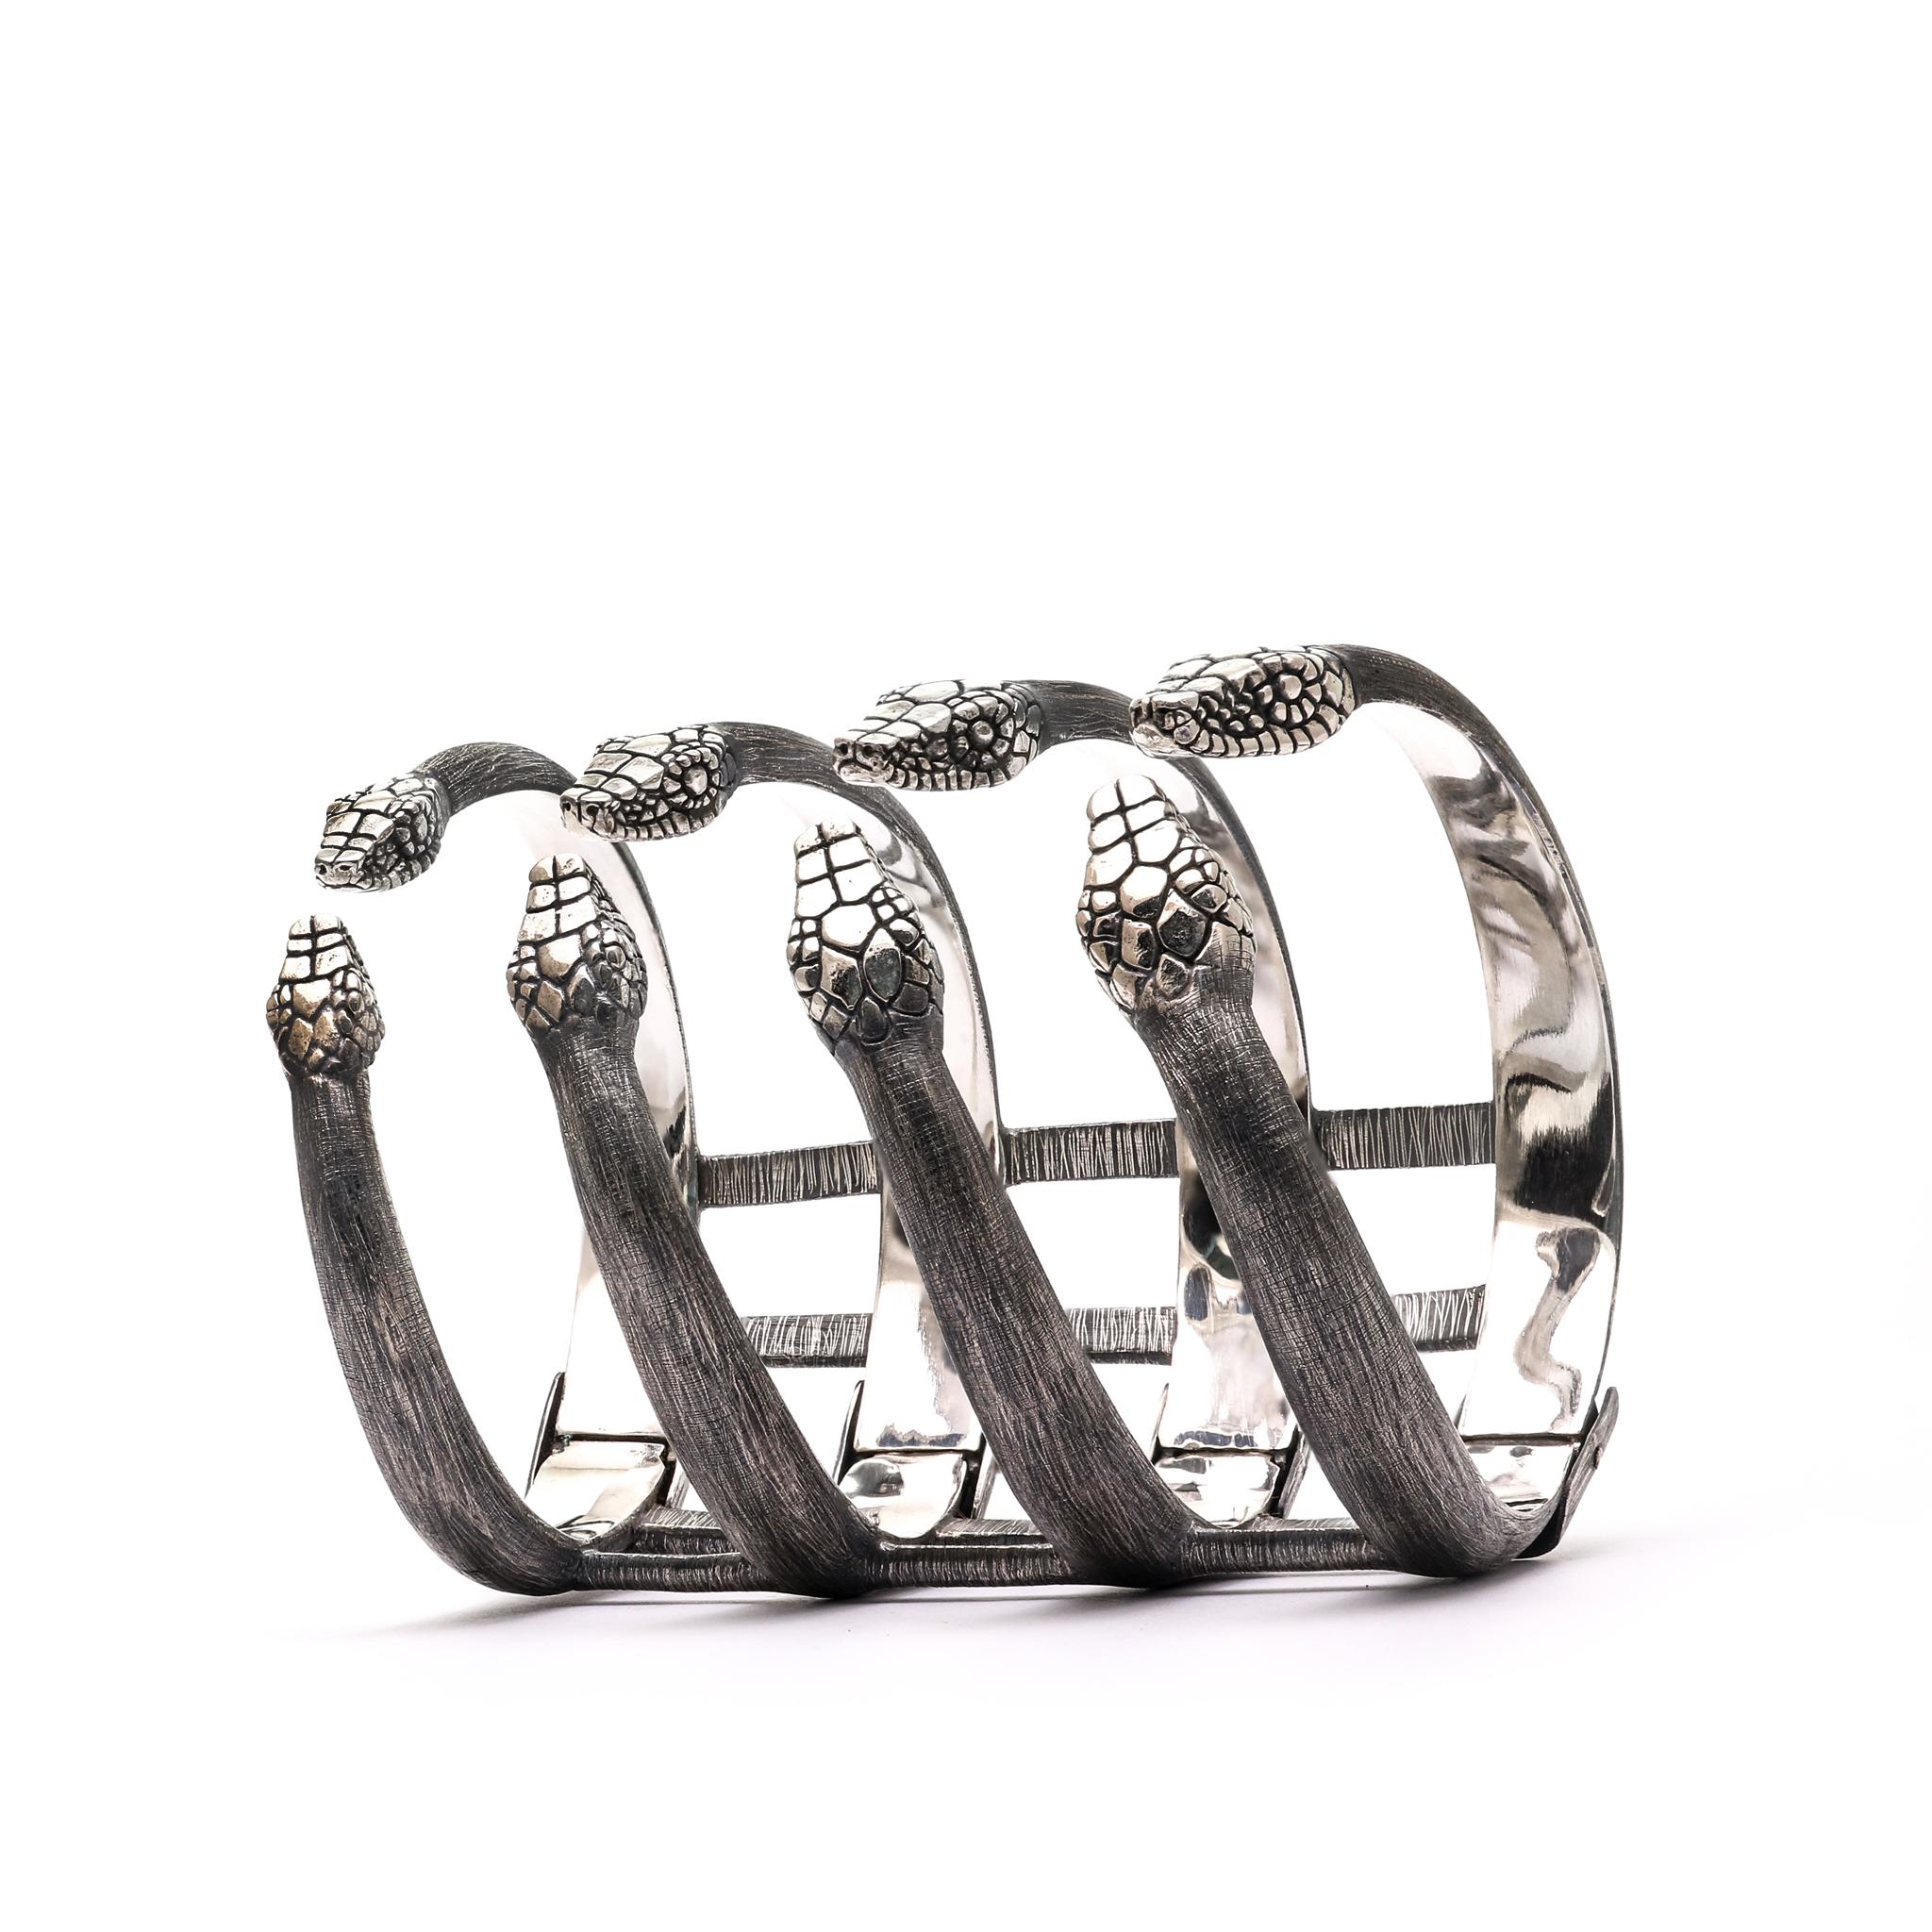 Hand-Crafted Hydra Bracelet with 8 Snake Heads Crafted from Sterling Silver Etched & Oxidised